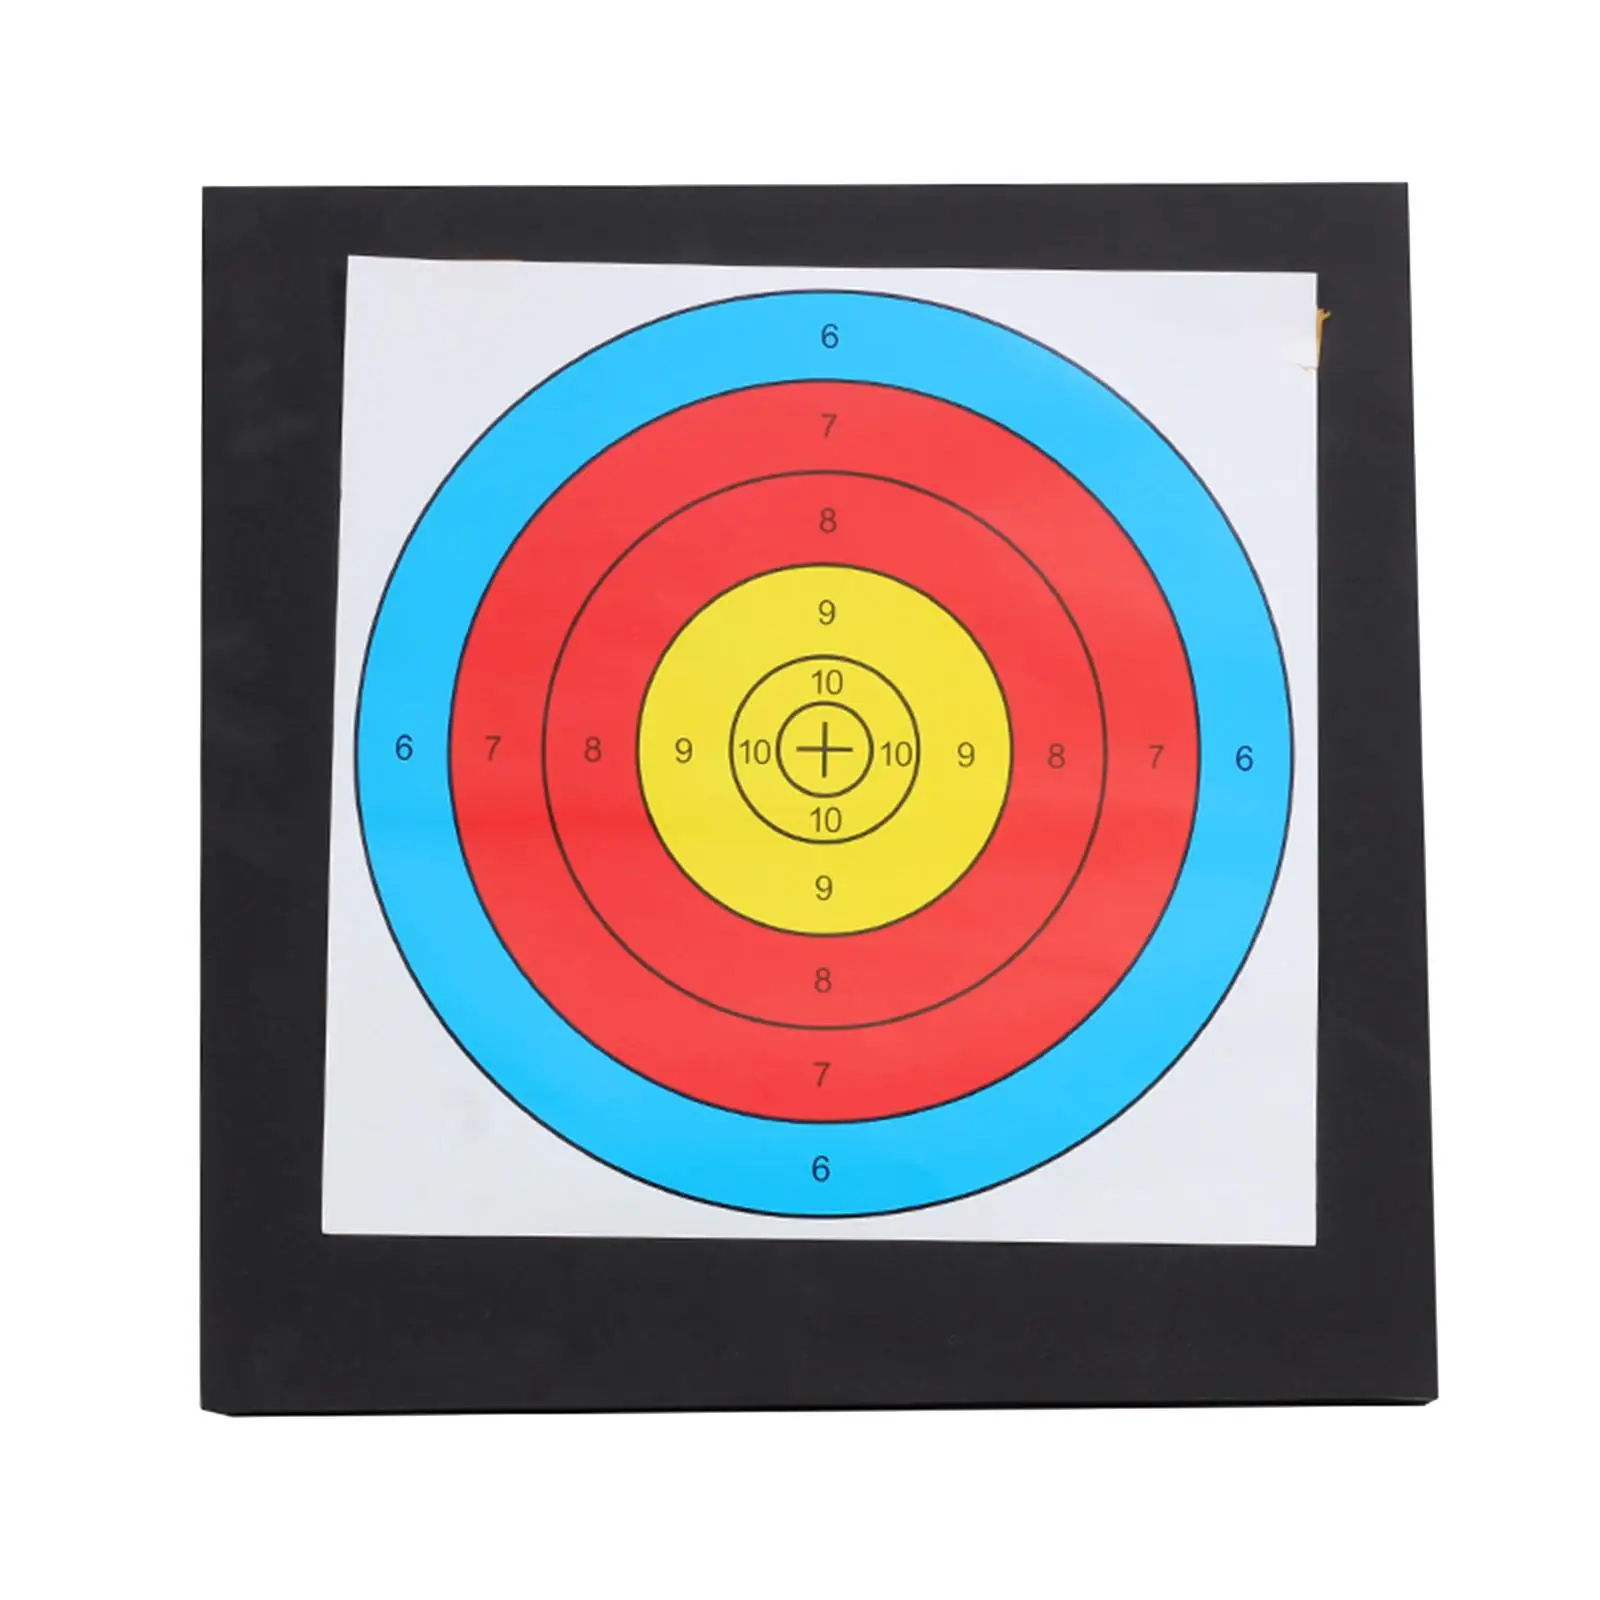 

Portable Archery Target with Paper Target Foam Compound Bow High Density Hanging for Shooting Training Backyard Indoor Outdoor